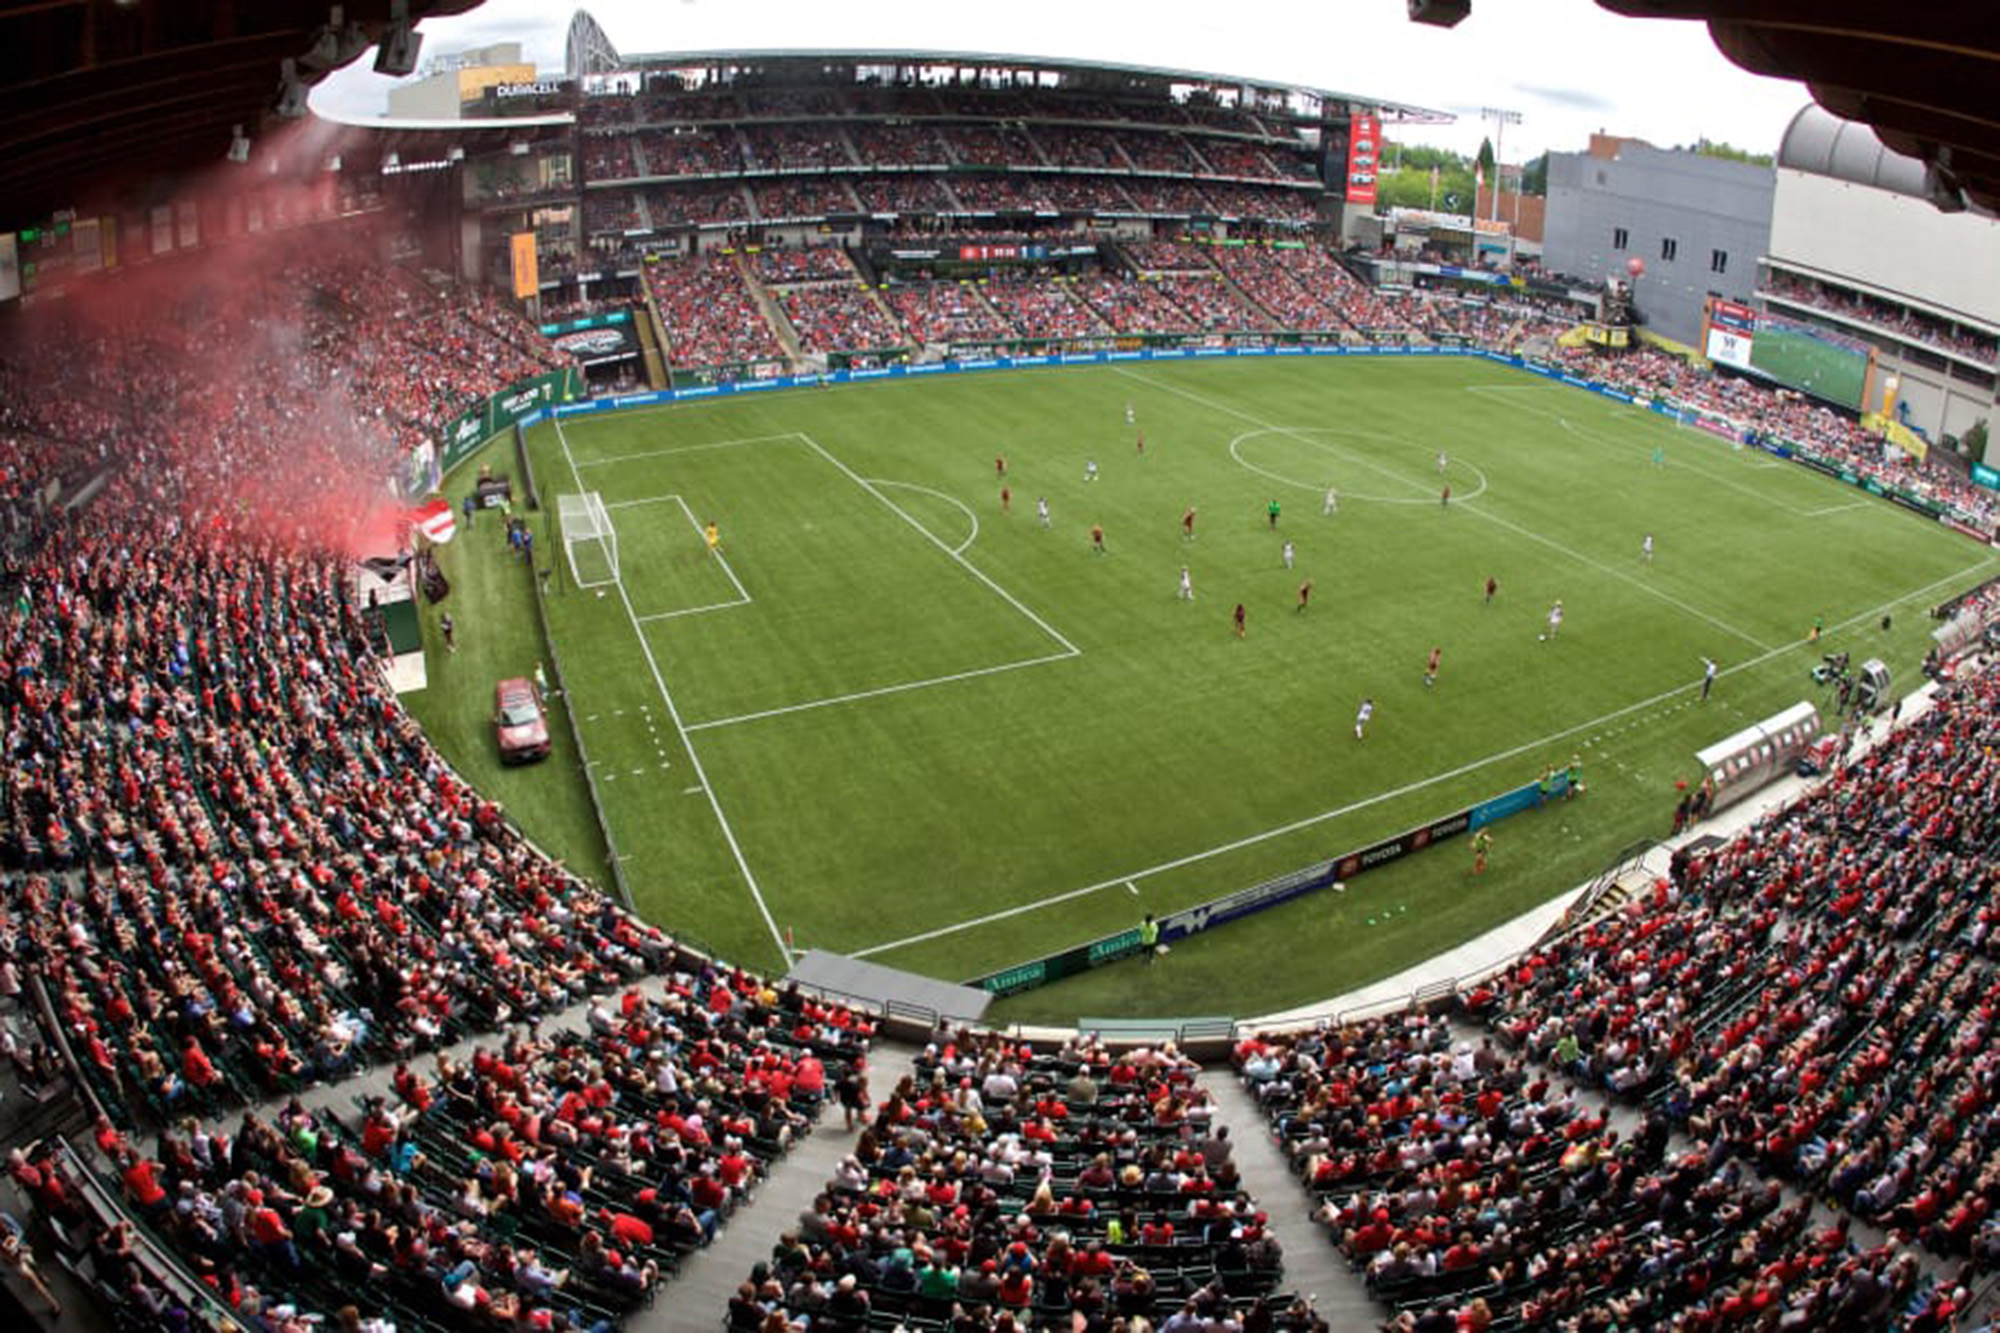 There won’t be 25,218 fans at Providence Park this soccer season, but Oregon will allow 25 percent capacity.